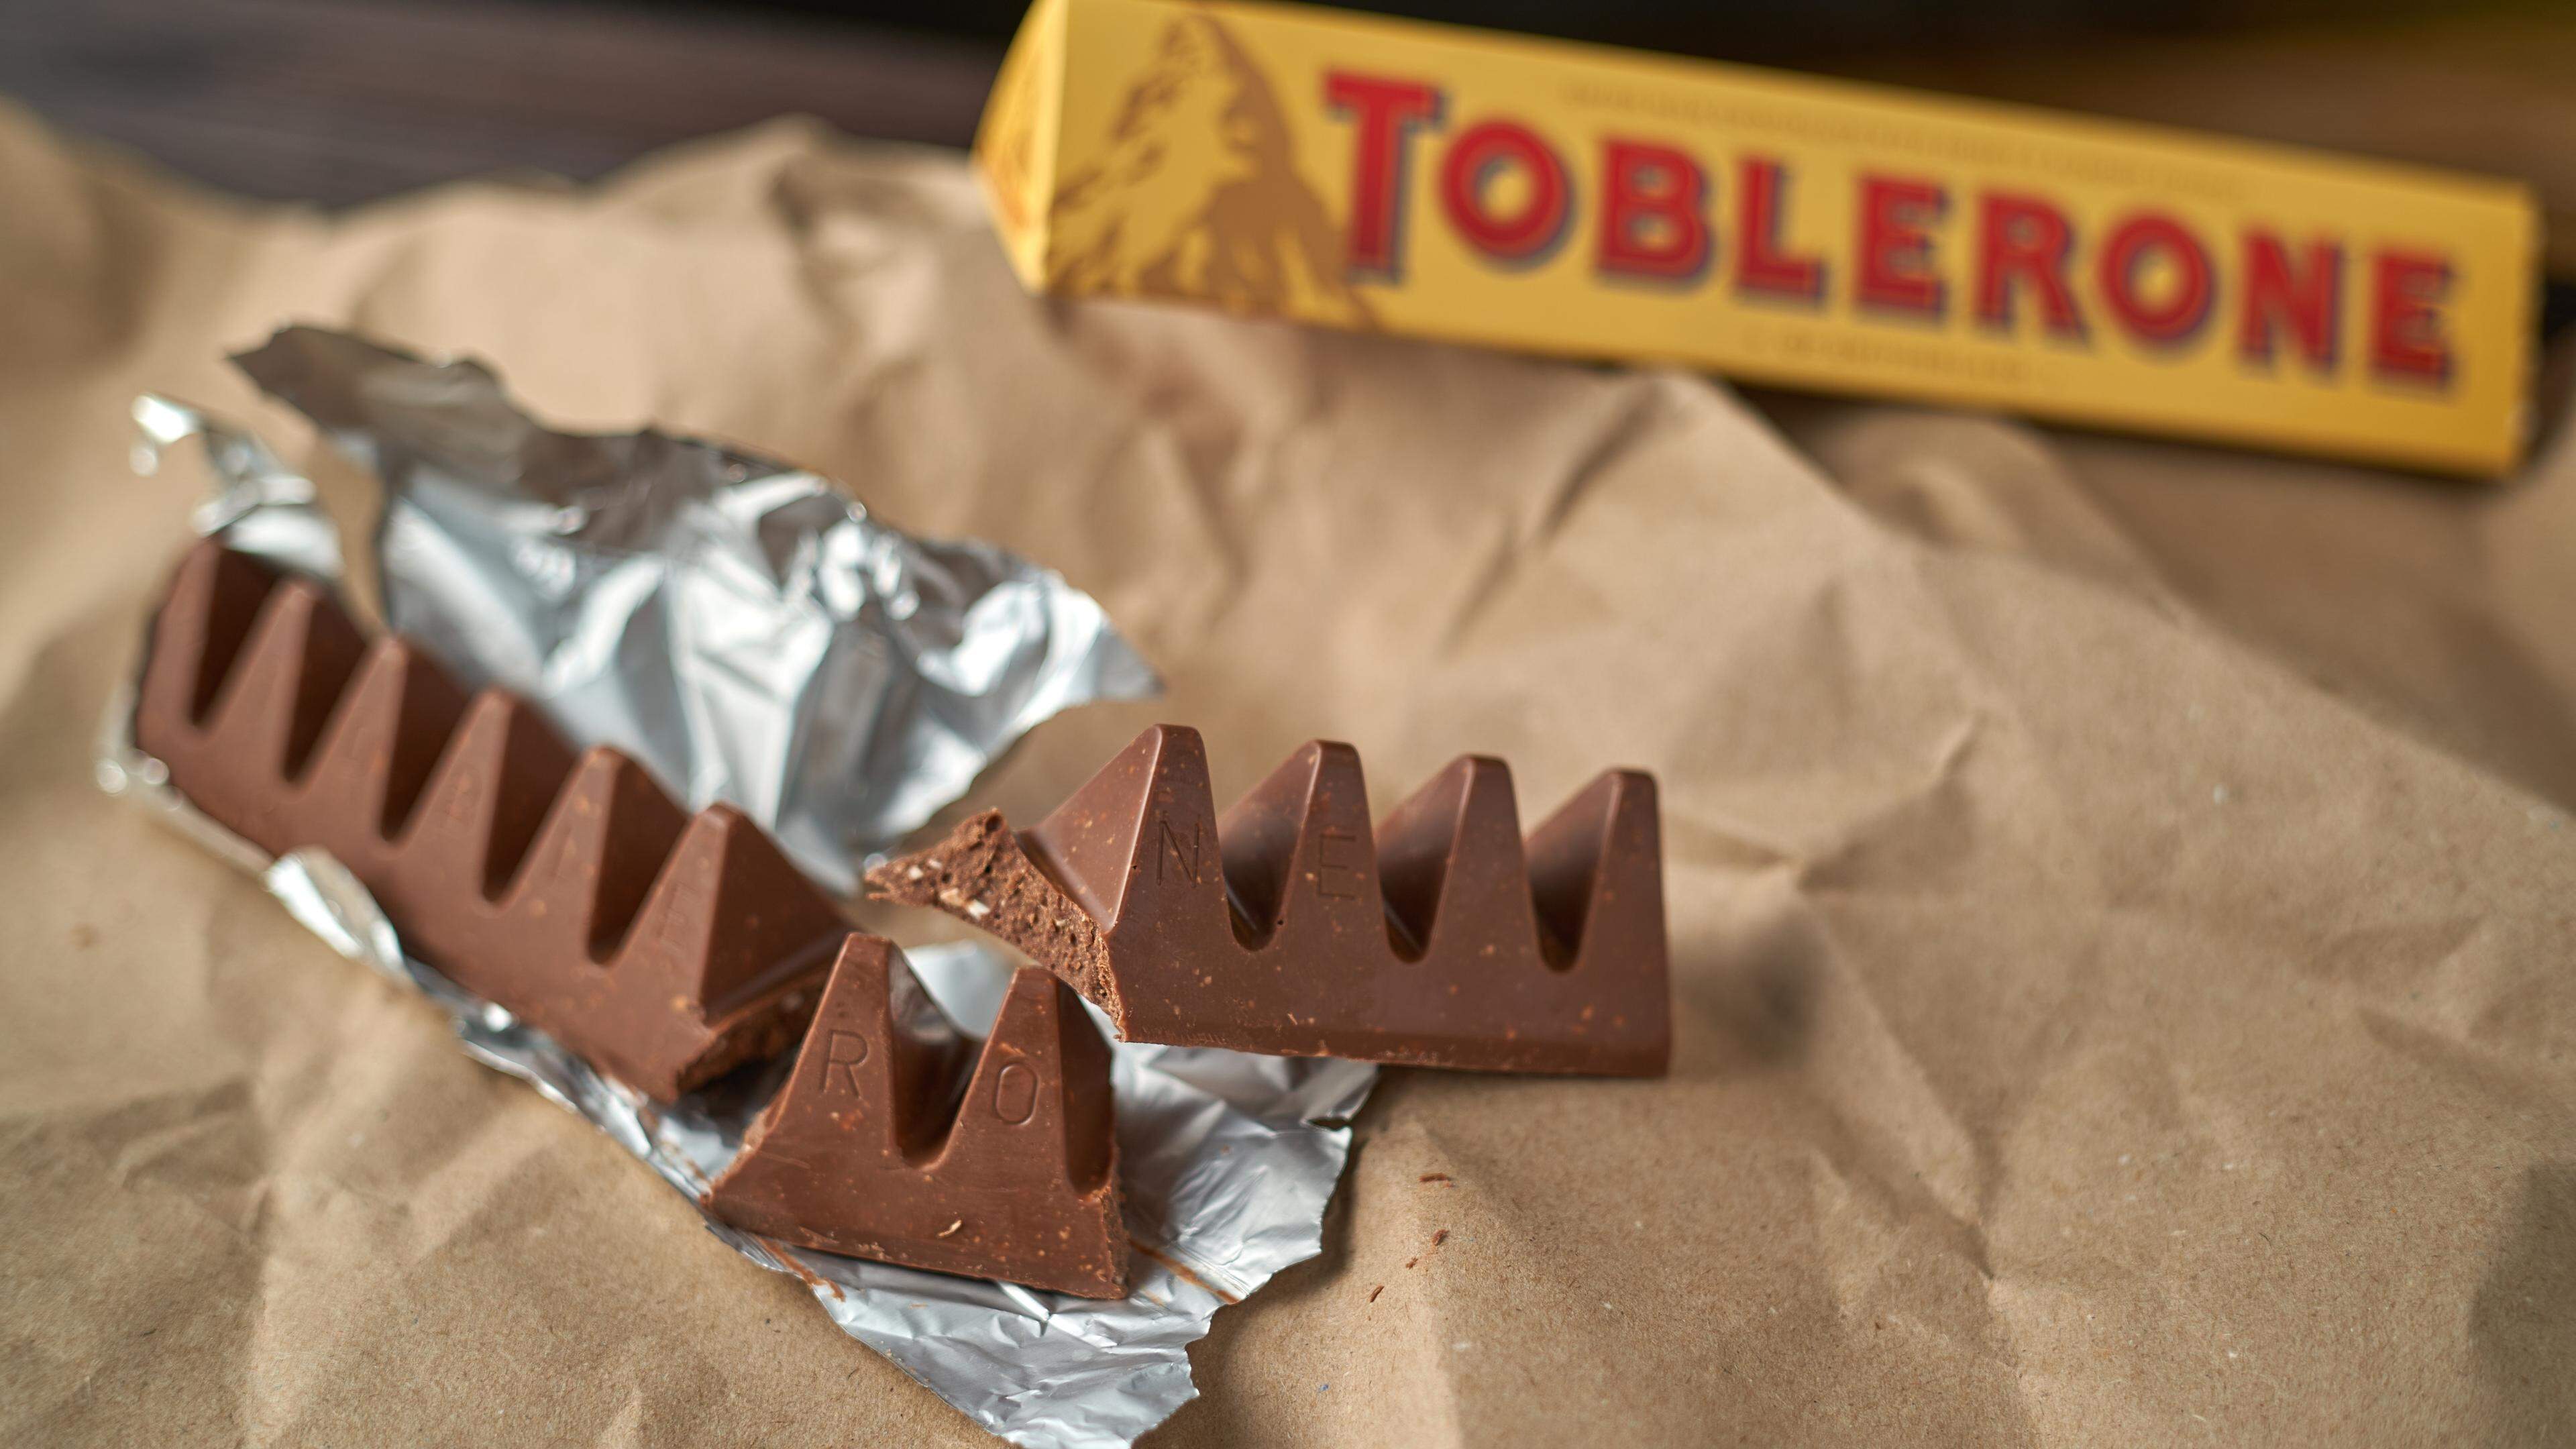 The EU said the maker of Toblerone reached anticompetitive agreements with distributors to carve up markets and bump up prices